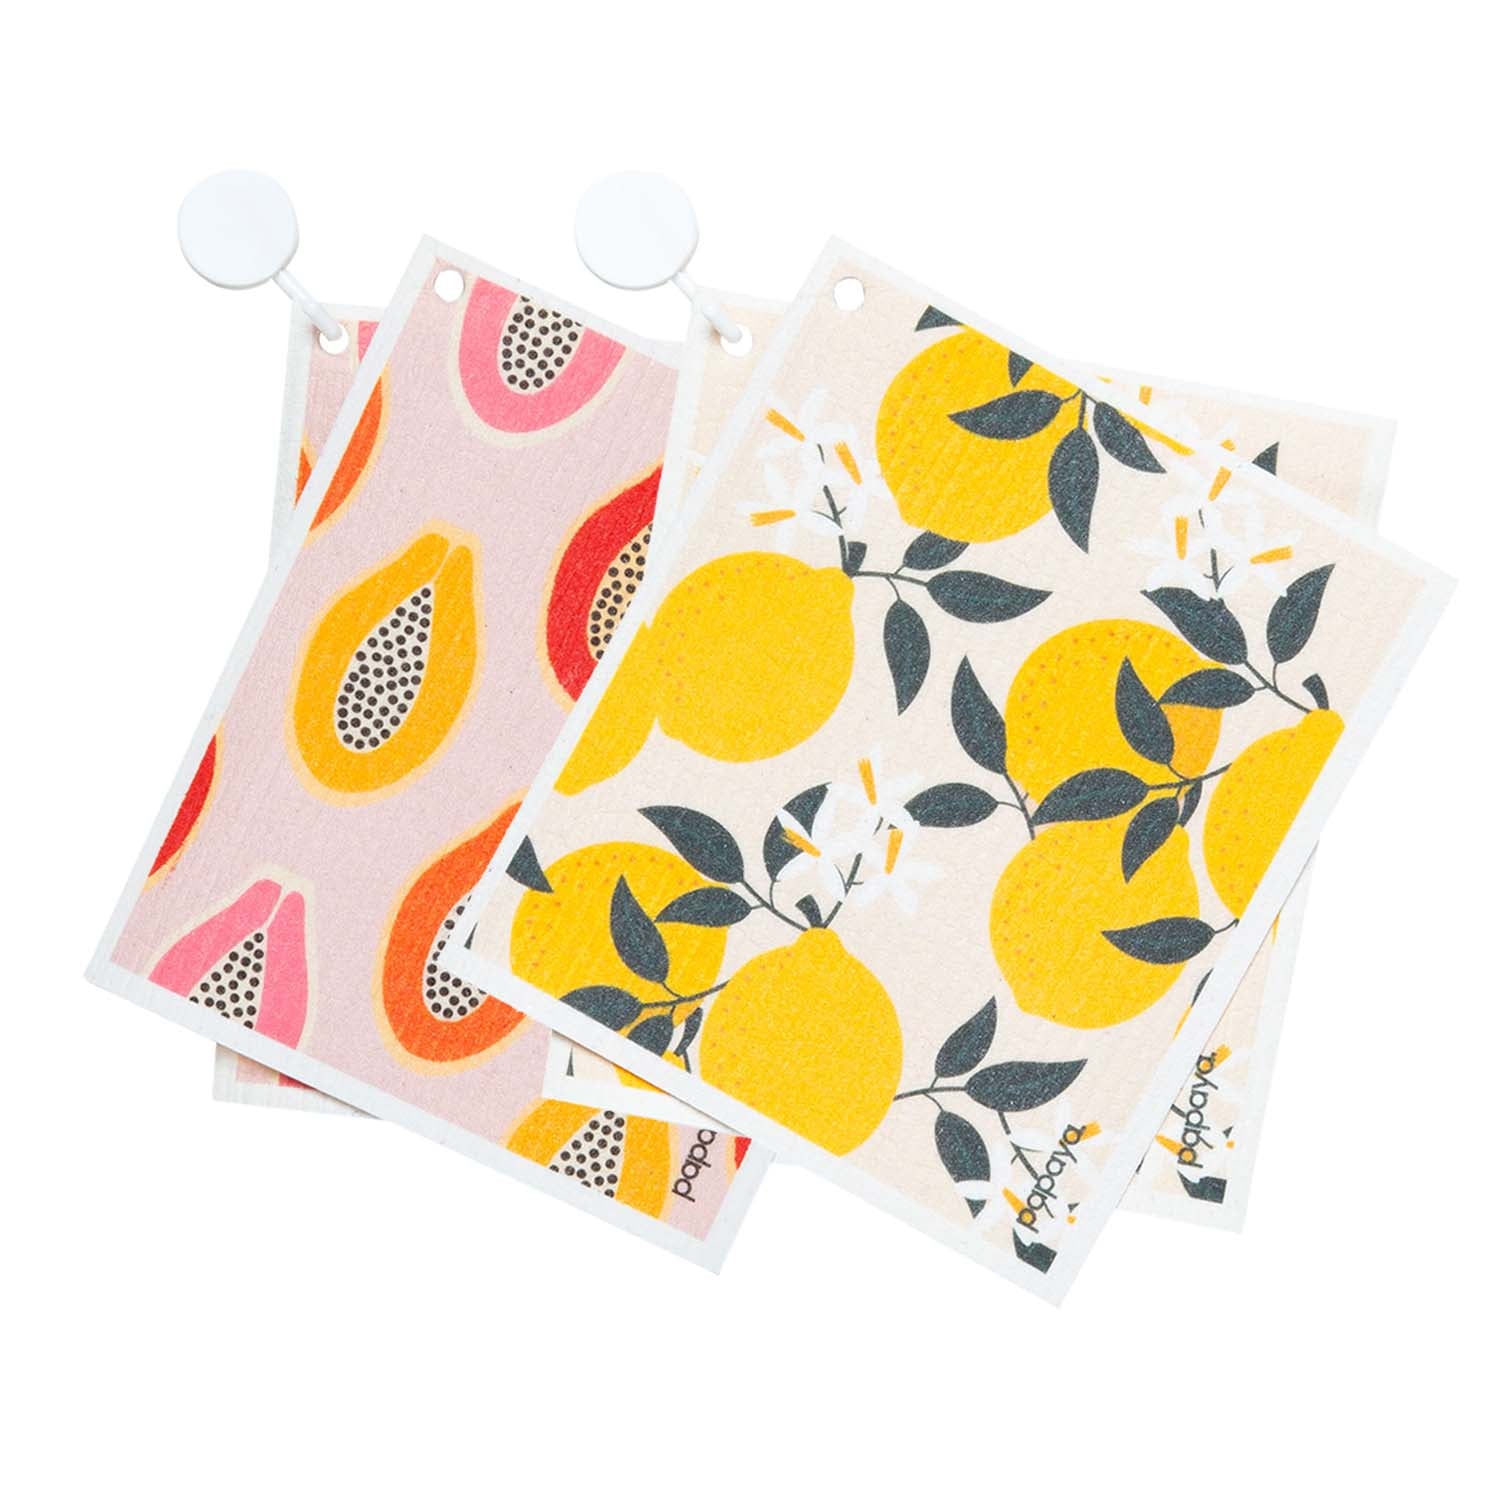 Reusable Paper Towels That Actually Work